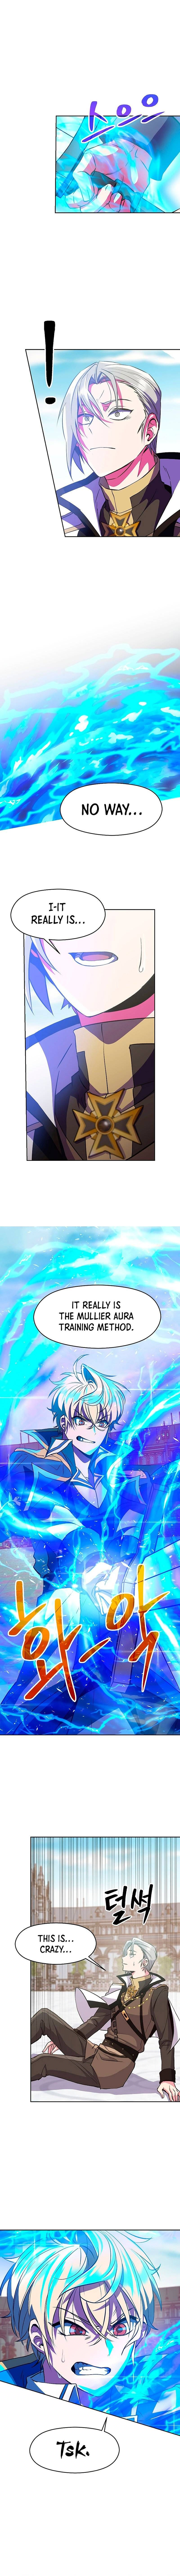 Archmage Transcending Through Regression Chapter 8 page 6